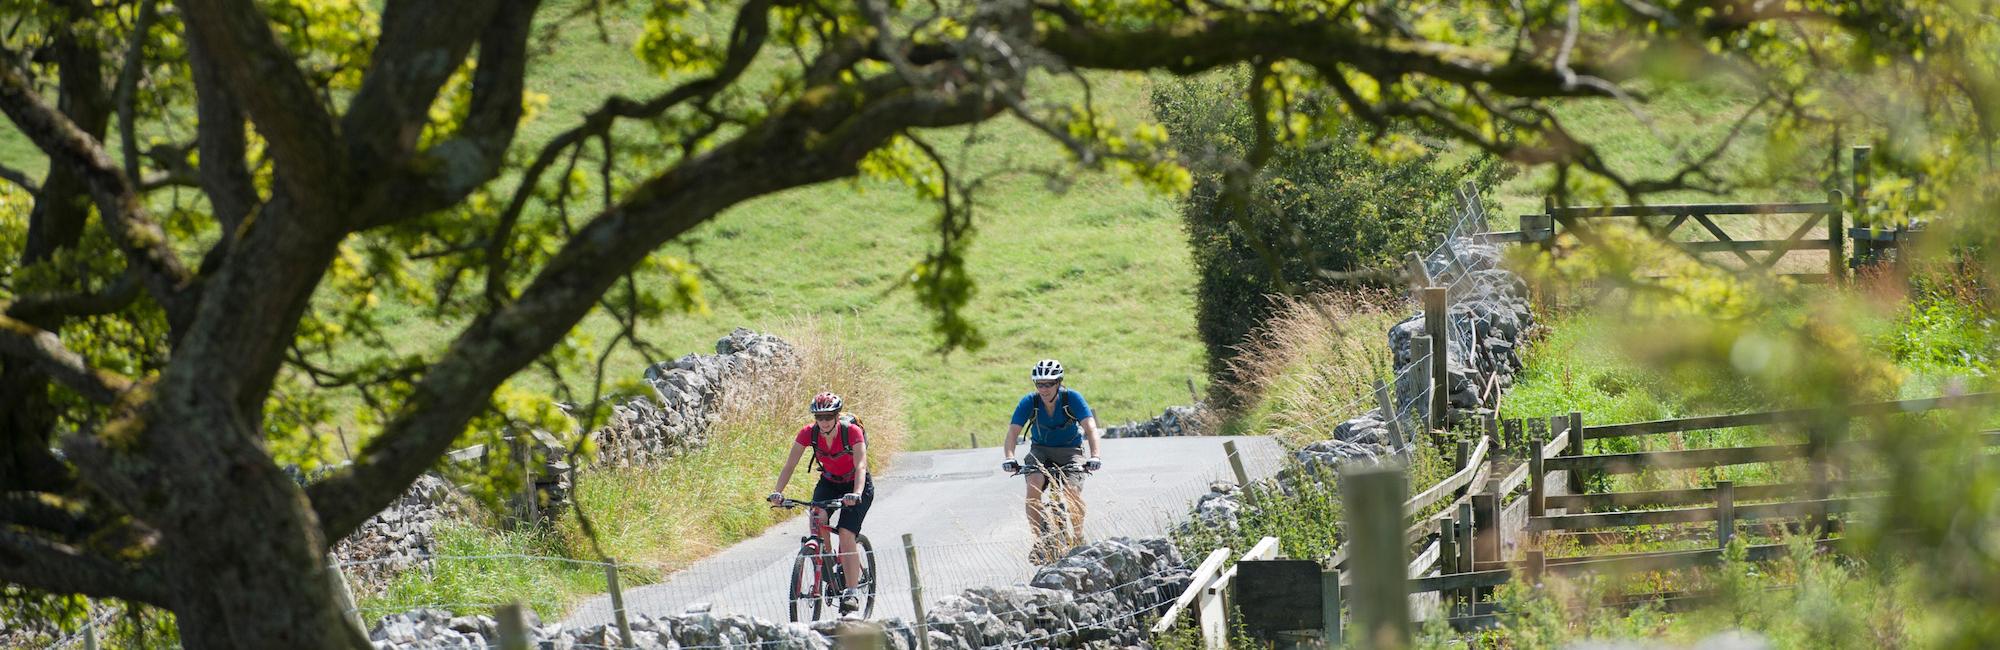 Yorkshire Dales Cycleway - S-Cape UK (c)Paul Harris Photography